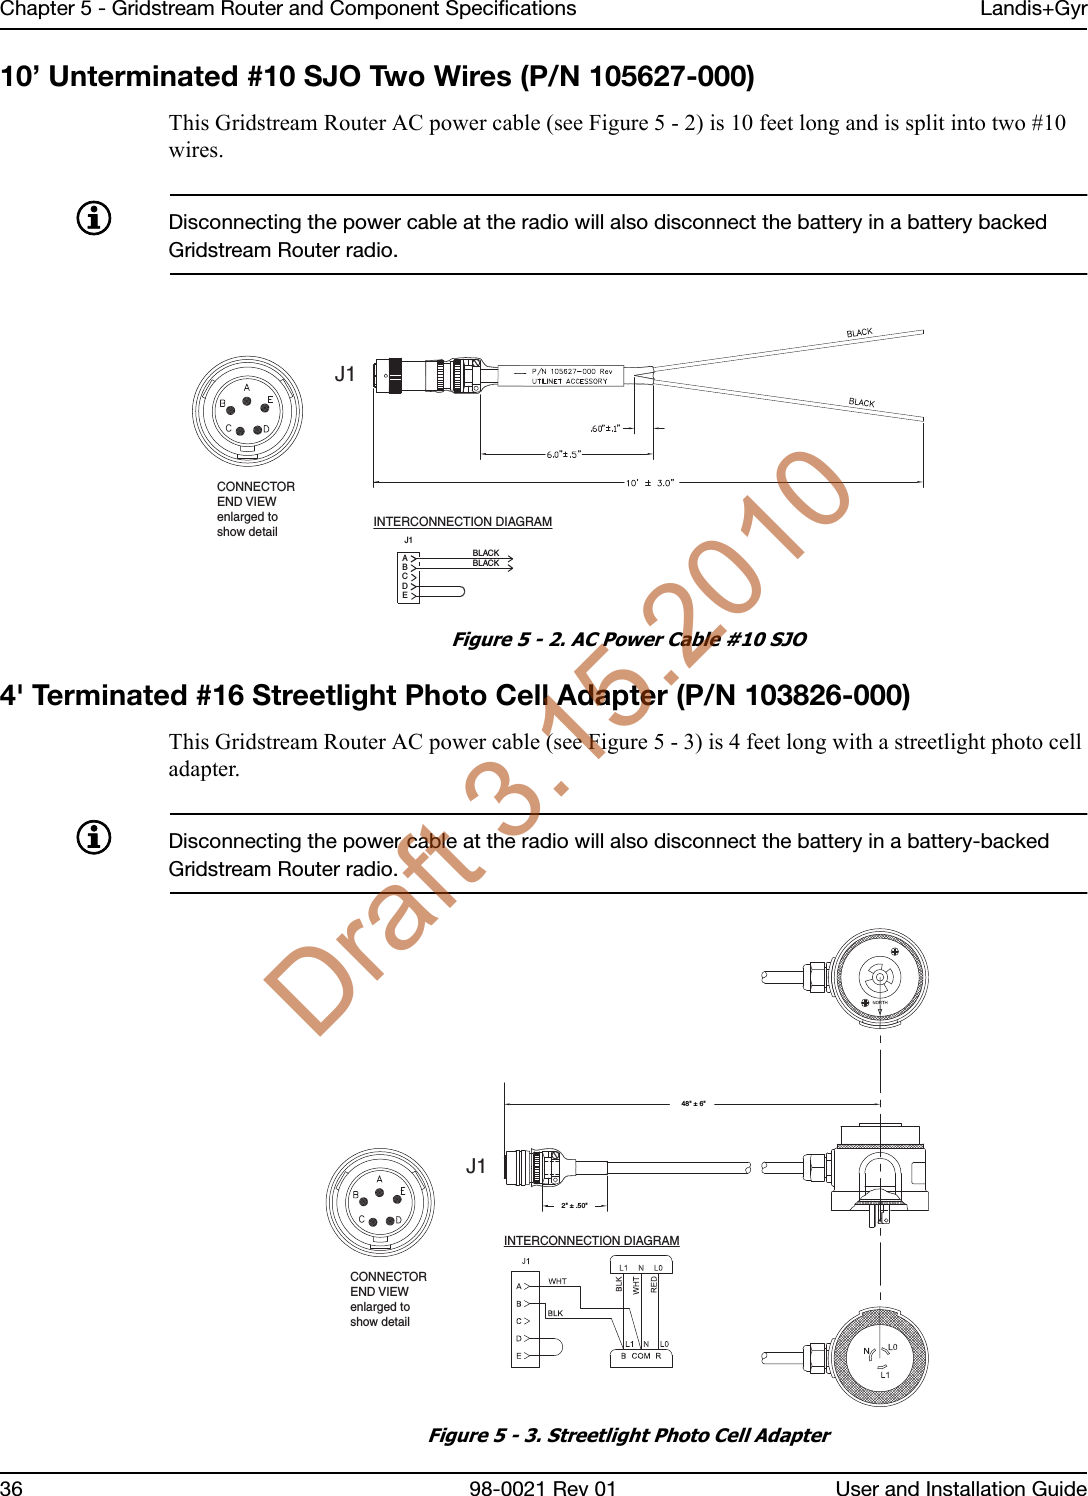 Chapter 5 - Gridstream Router and Component Specifications Landis+Gyr36 98-0021 Rev 01 User and Installation Guide10’ Unterminated #10 SJO Two Wires (P/N 105627-000)This Gridstream Router AC power cable (see Figure 5 - 2) is 10 feet long and is split into two #10 wires.Disconnecting the power cable at the radio will also disconnect the battery in a battery backed Gridstream Router radio.Figure 5 - 2. AC Power Cable #10 SJO4&apos; Terminated #16 Streetlight Photo Cell Adapter (P/N 103826-000)This Gridstream Router AC power cable (see Figure 5 - 3) is 4 feet long with a streetlight photo cell adapter.Disconnecting the power cable at the radio will also disconnect the battery in a battery-backed Gridstream Router radio.Figure 5 - 3. Streetlight Photo Cell AdapterINTERCONNECTION DIAGRAMEDCBAJ1BLACKBLACKJ1CONNECTOREND VIEWenlarged toshow detailINTERCONNECTION DIAGRAMJ1CONNECTOREND VIEWenlarged toshow detail48&quot; ± 6&quot; 2&quot; ± .50&quot; Draft 3.15.2010